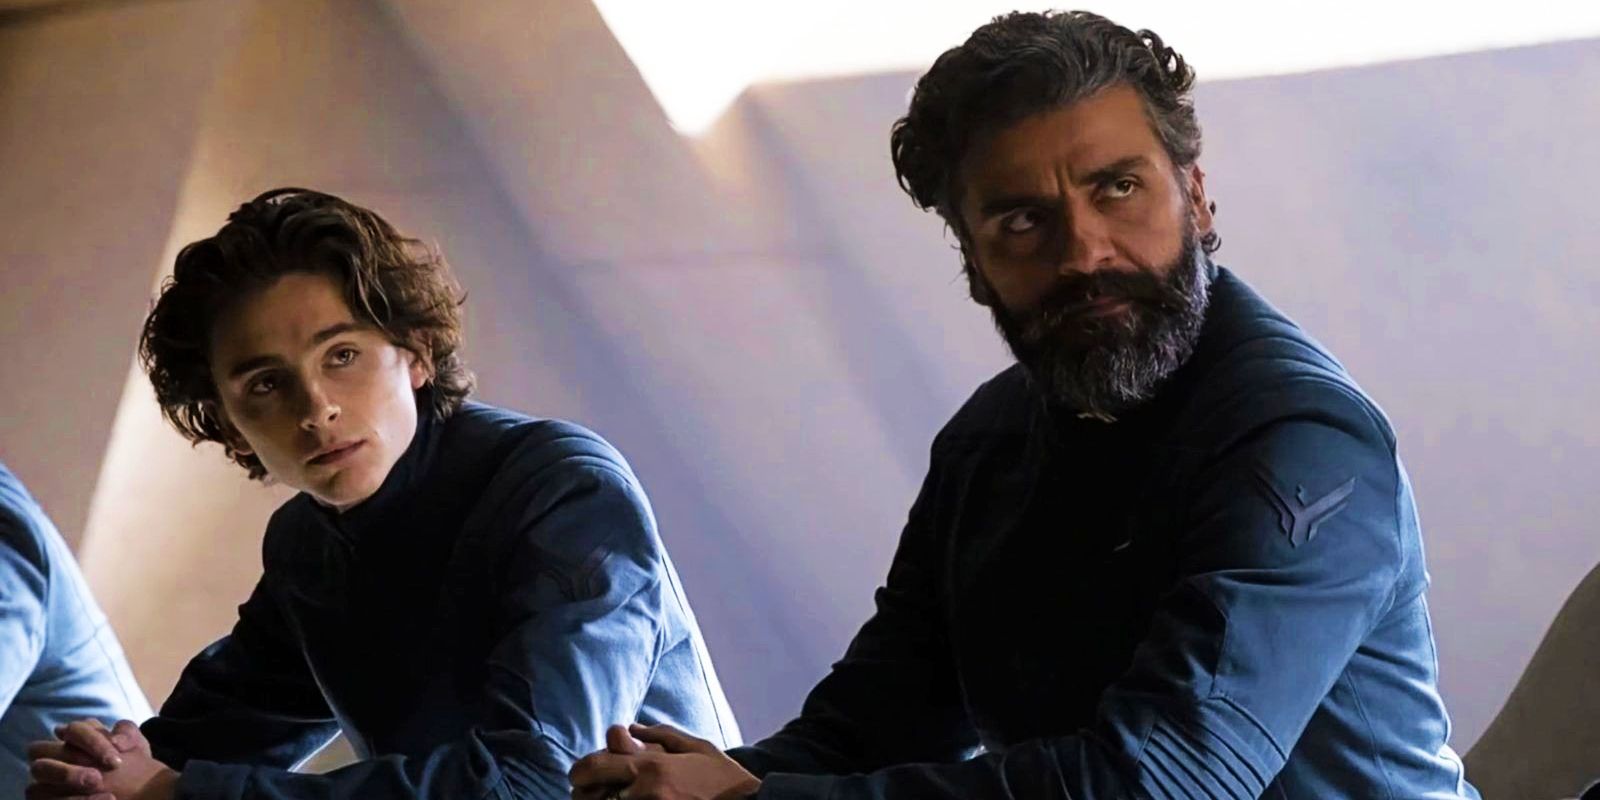 Paul Atreides (Timothee Chalamet) and the Duke (Oscar Isaac) sharing a moment in Dune (2021)